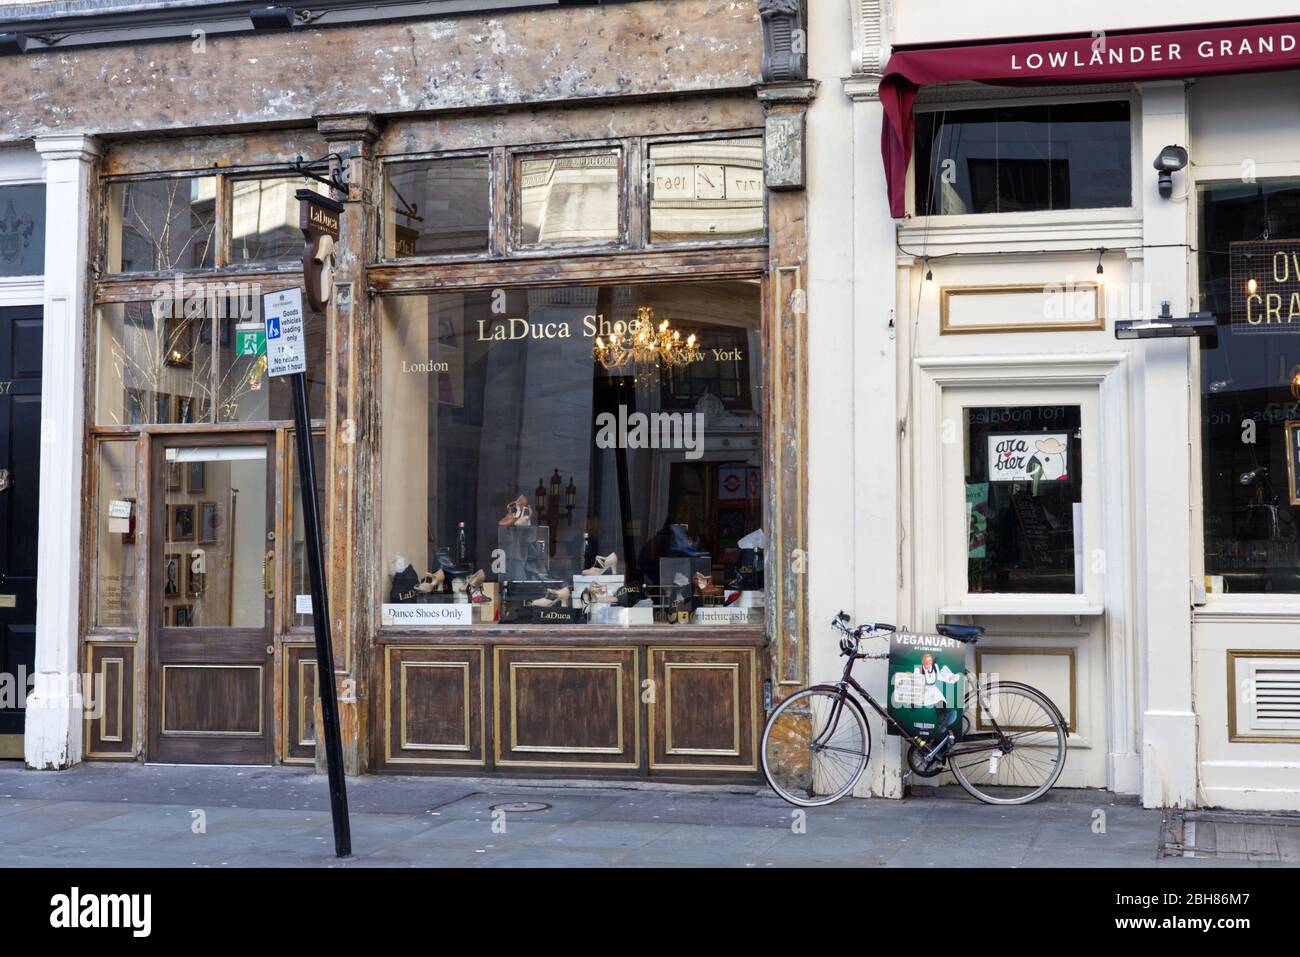 lowlander grand and LaDuca shoes shop, London Stock Photo